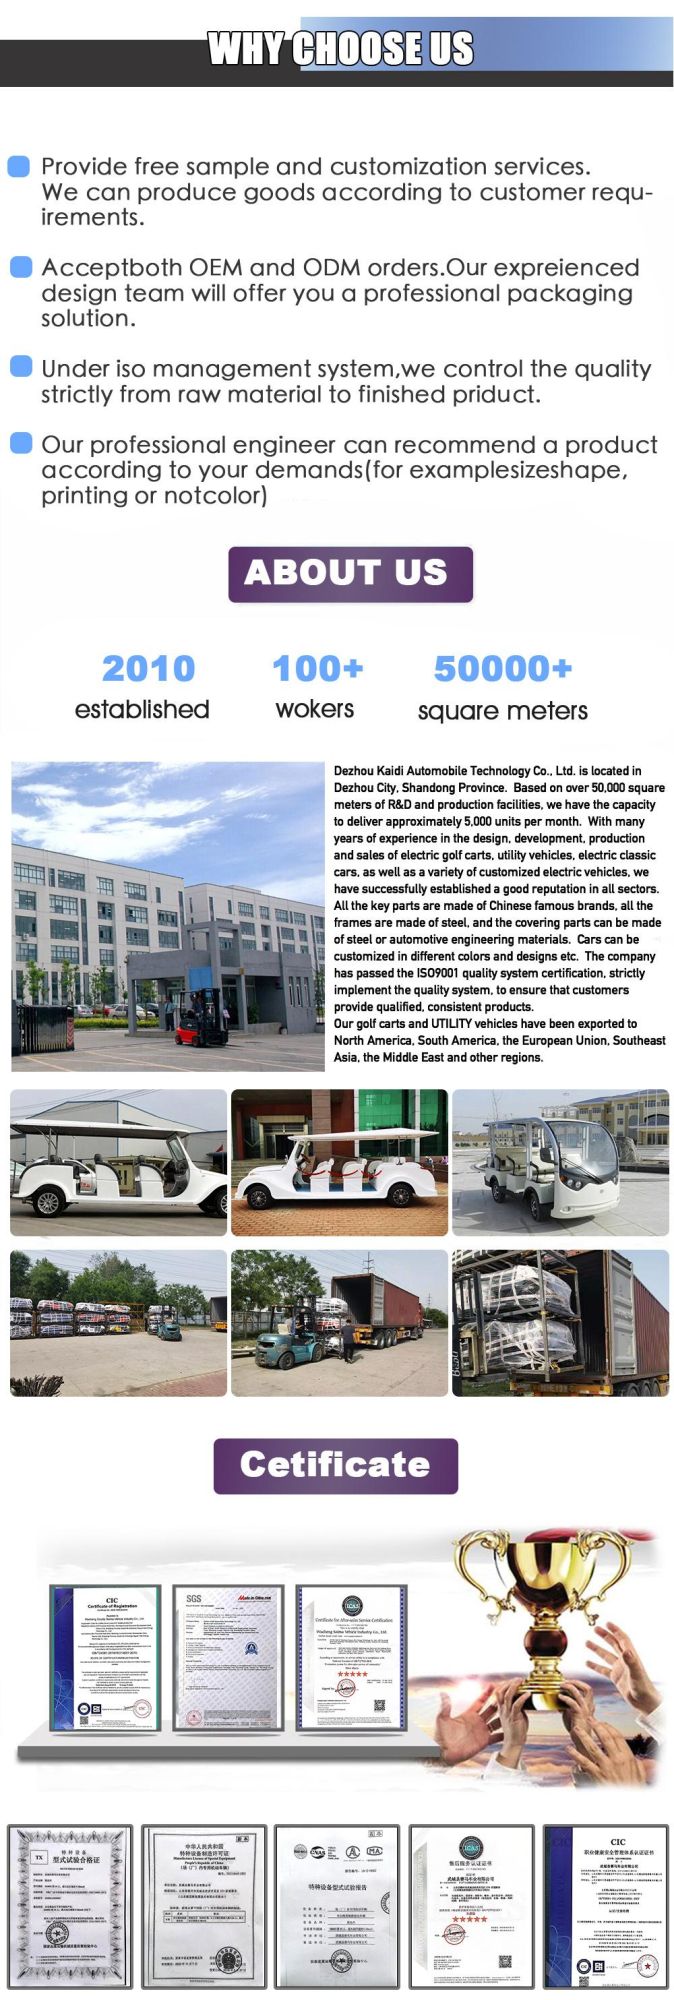 Customized Golf Scooter Golfcart Travel Car Tour Car Sightseeing Bus Park Car with Brushless Motor with Golf Bag Holder